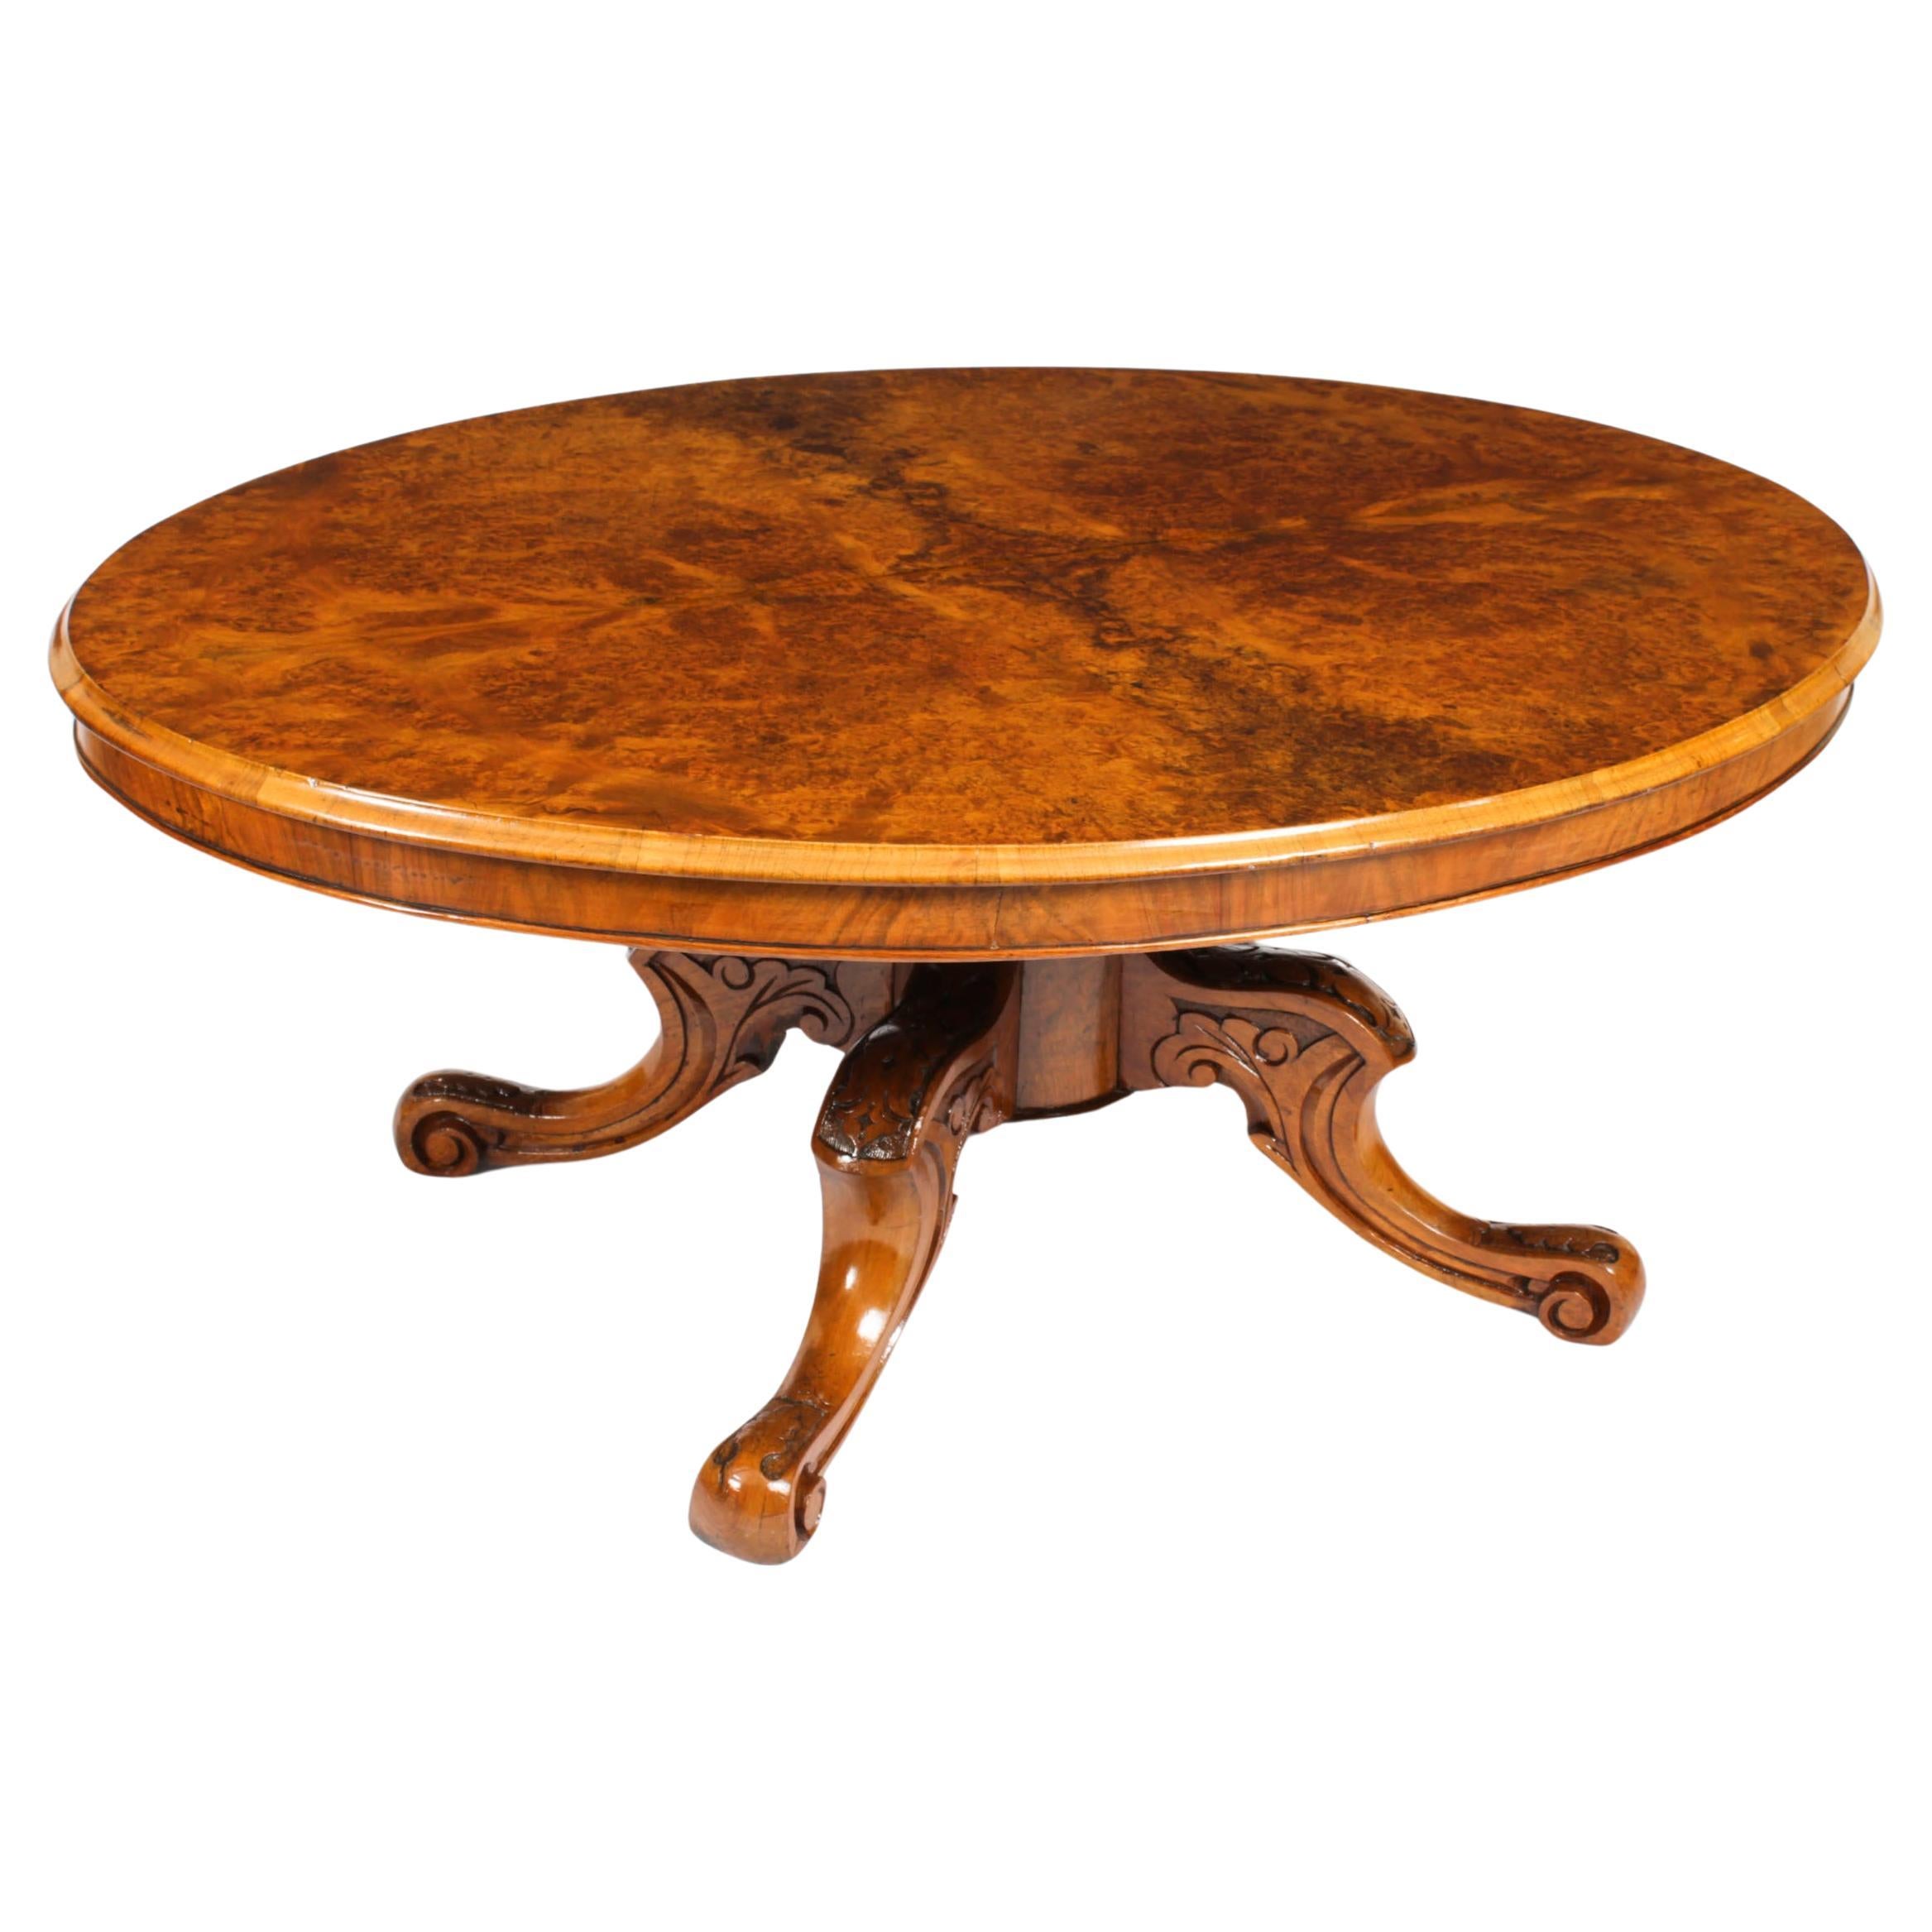 Antique Burr Walnut Oval Coffee Table 1860s 19th Century For Sale